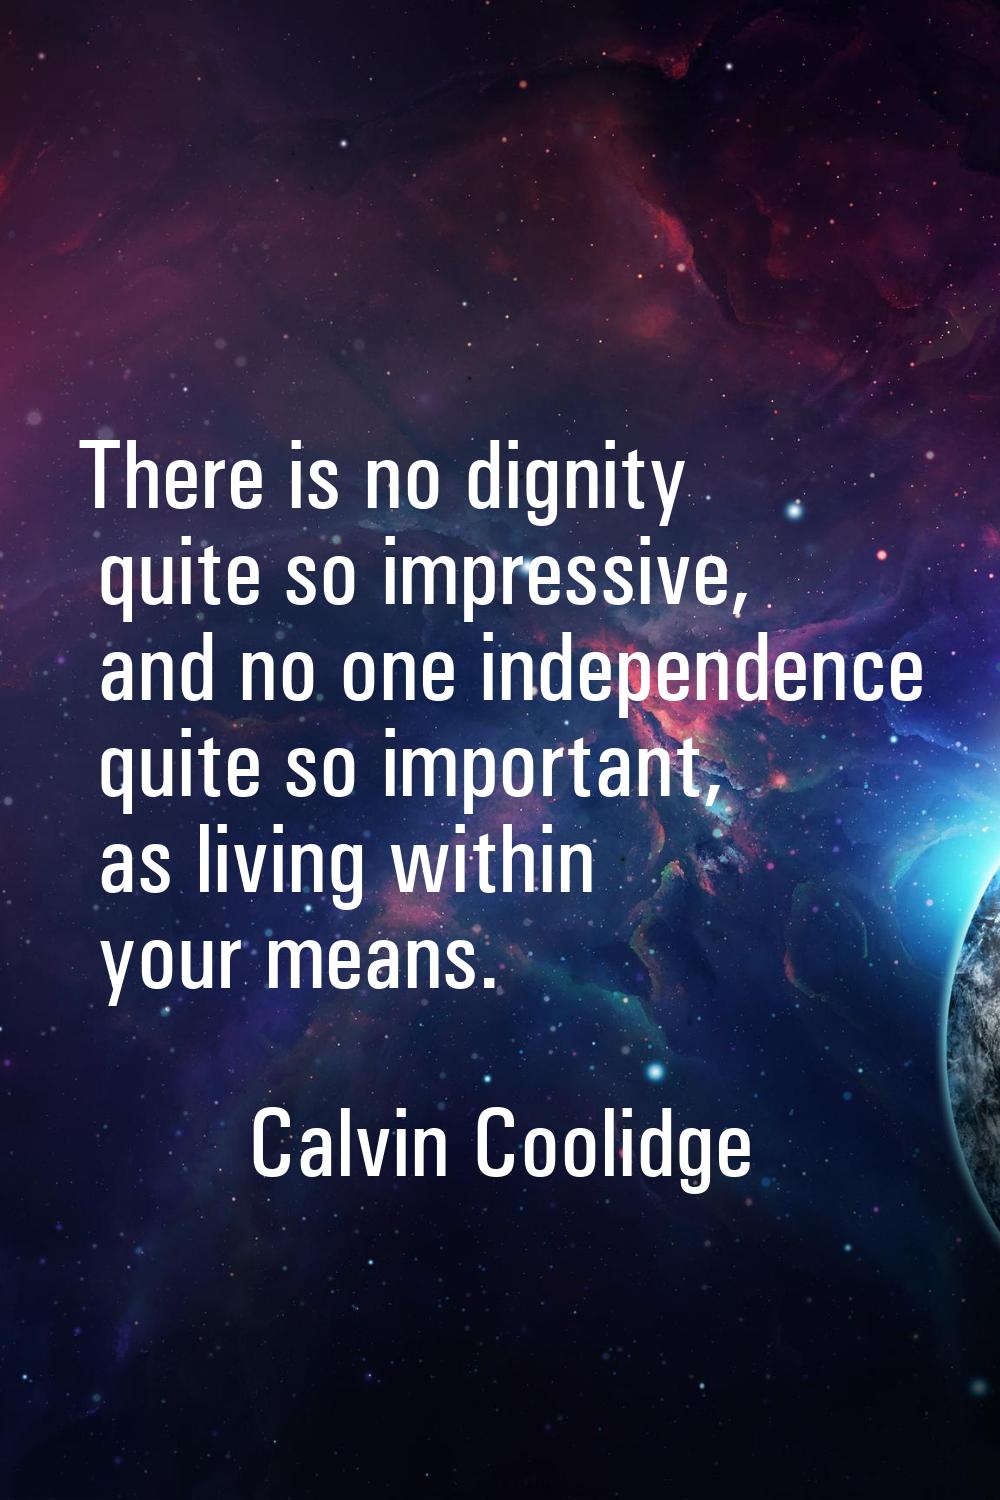 There is no dignity quite so impressive, and no one independence quite so important, as living with